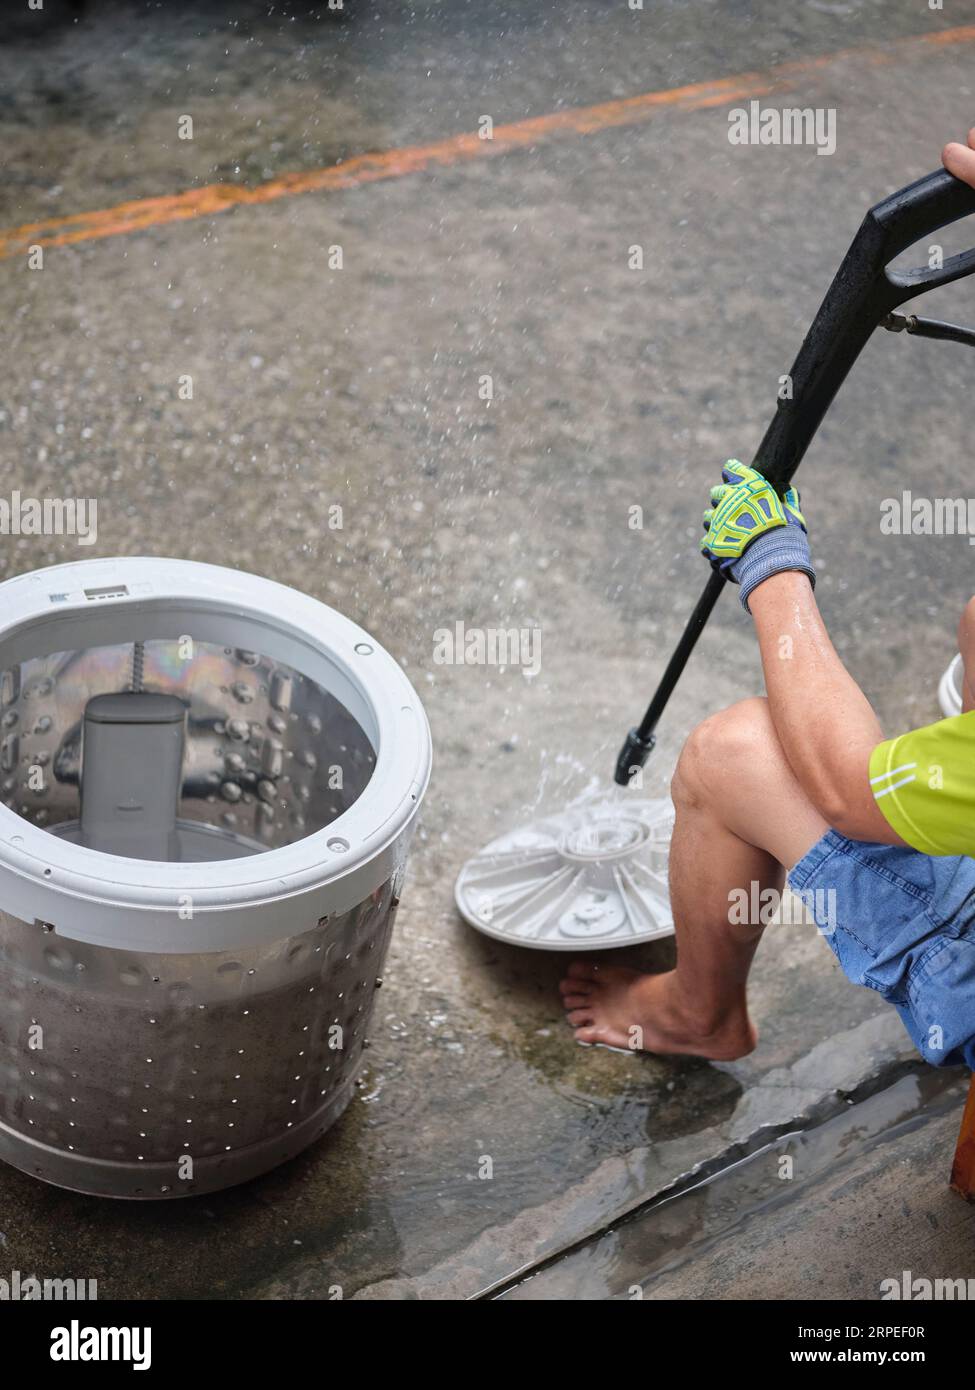 Hands of repairman using  Water sprayer machine after repairing or removing it to clean the drum,repair of household electrical appliances or cleaning Stock Photo